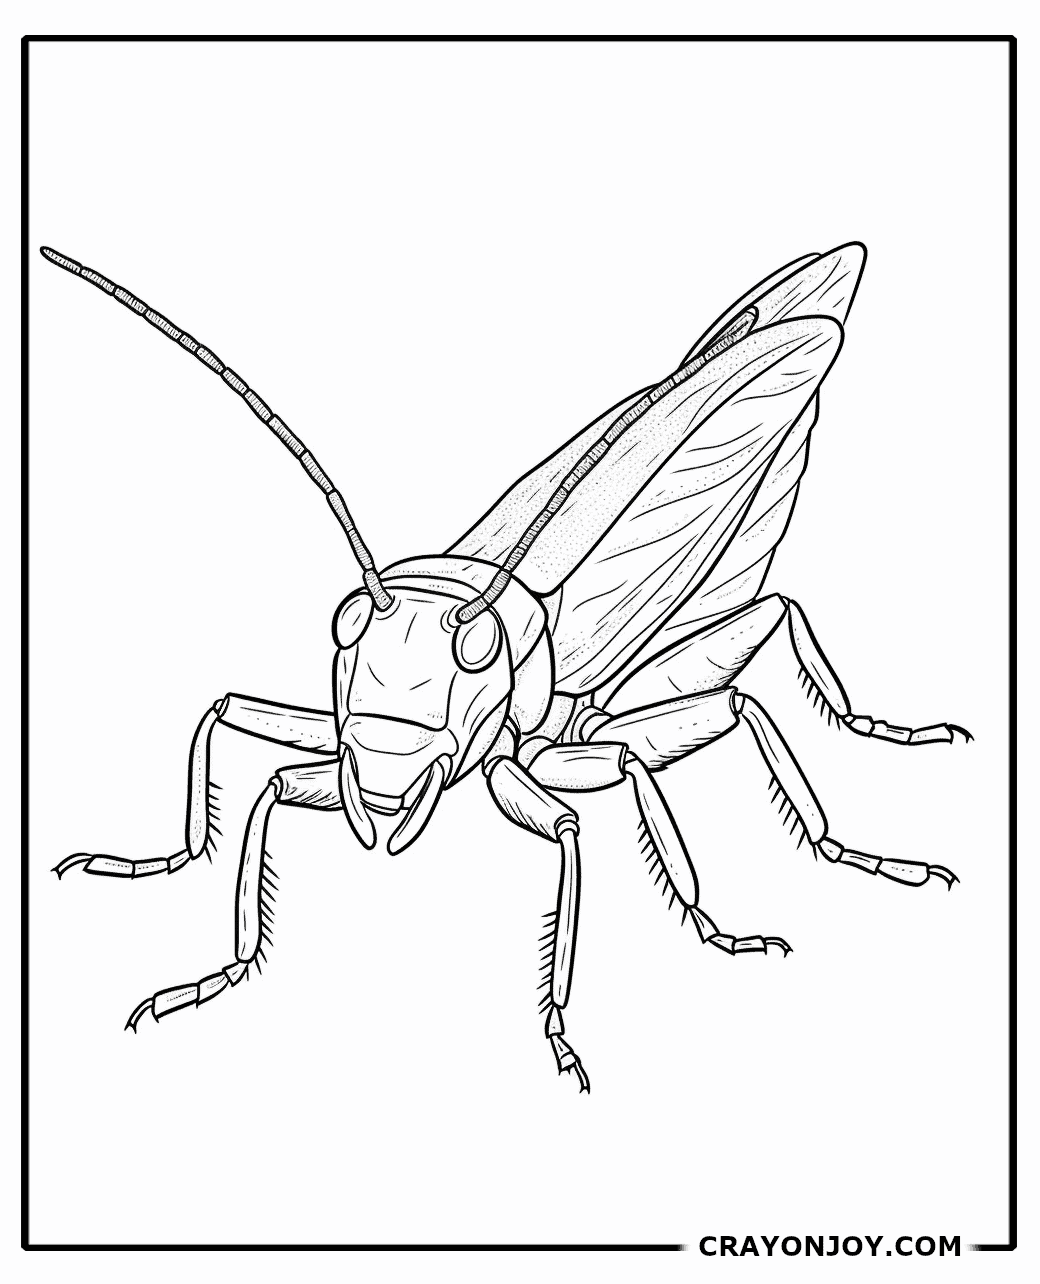 Free Printable Cricket Coloring Pages for Kids & Adults